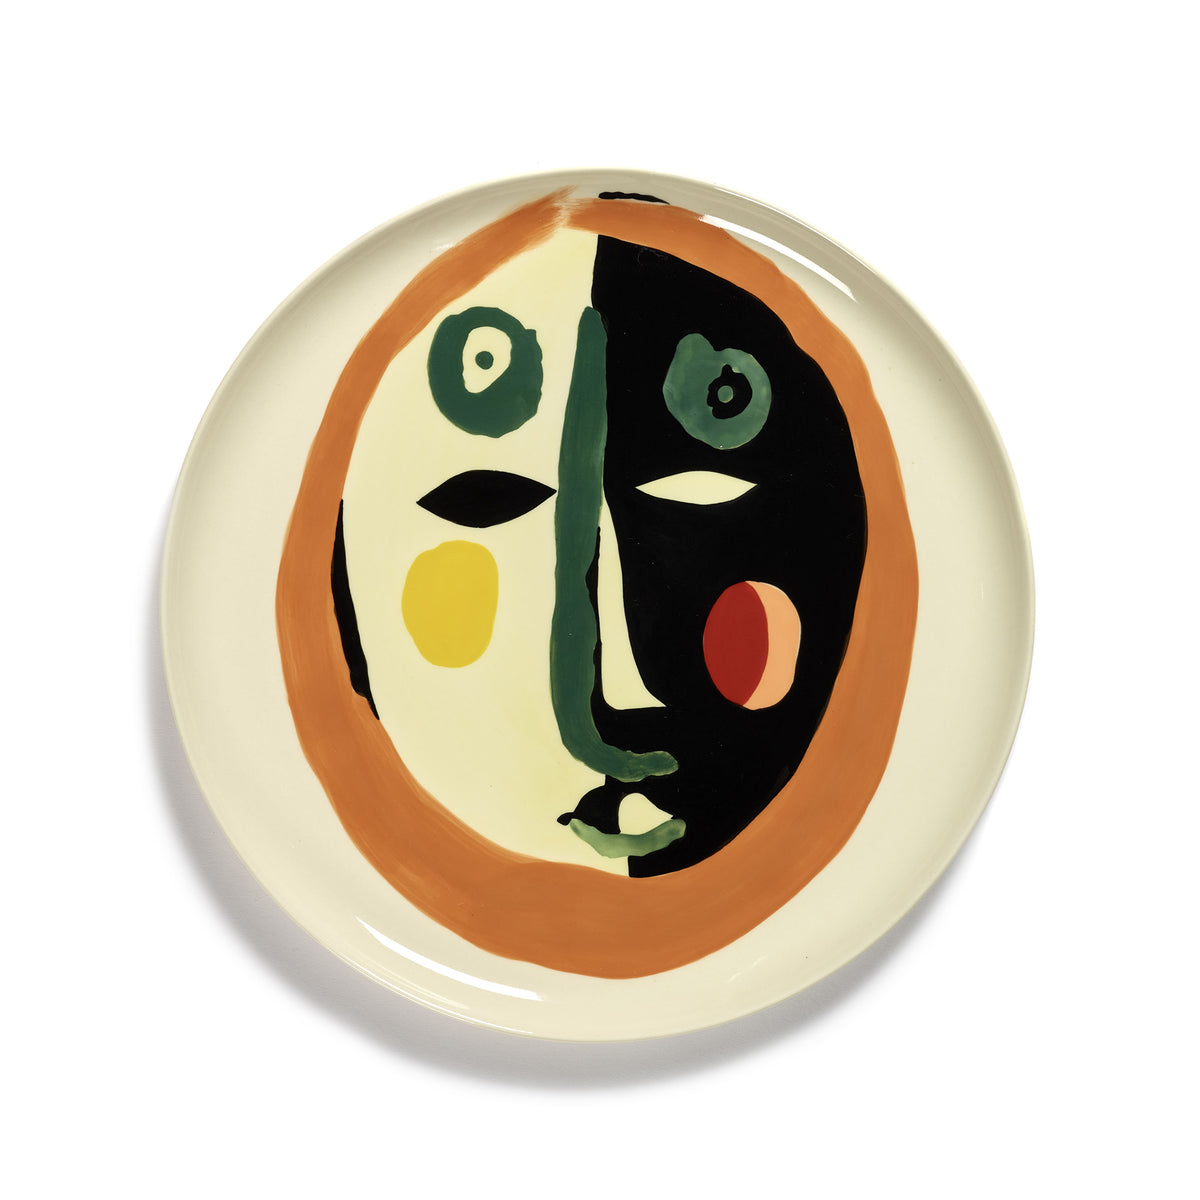 White Serving Plate with Face Motif